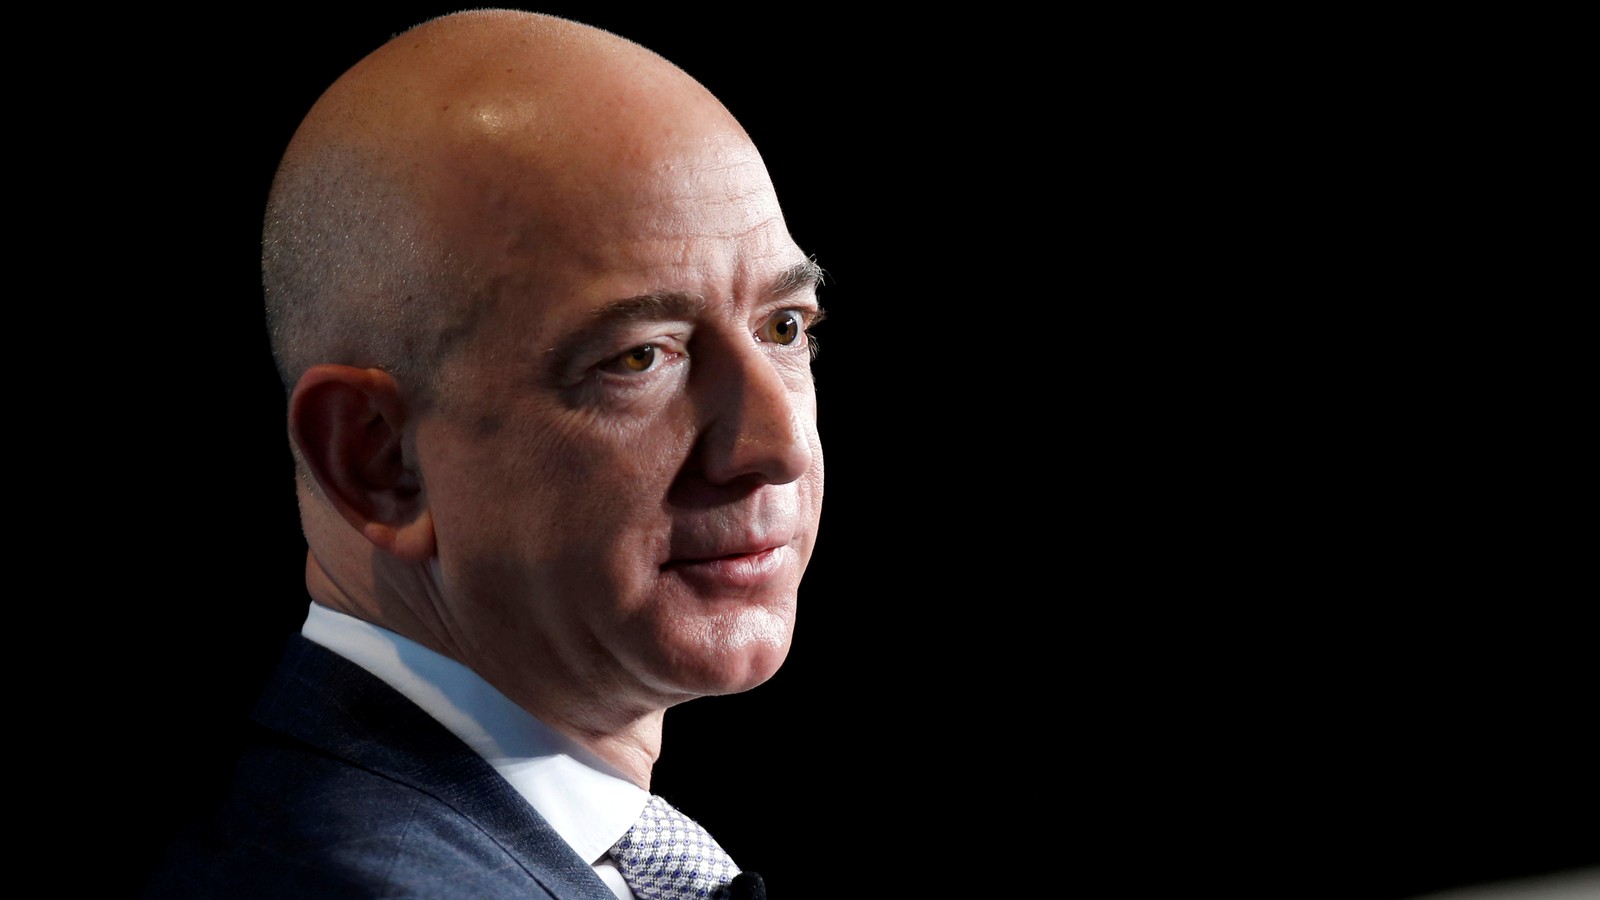 Blackmail Pubilc Porn Video - Sextortion: Is Jeff Bezos's Stand a Turning Point? - The Atlantic